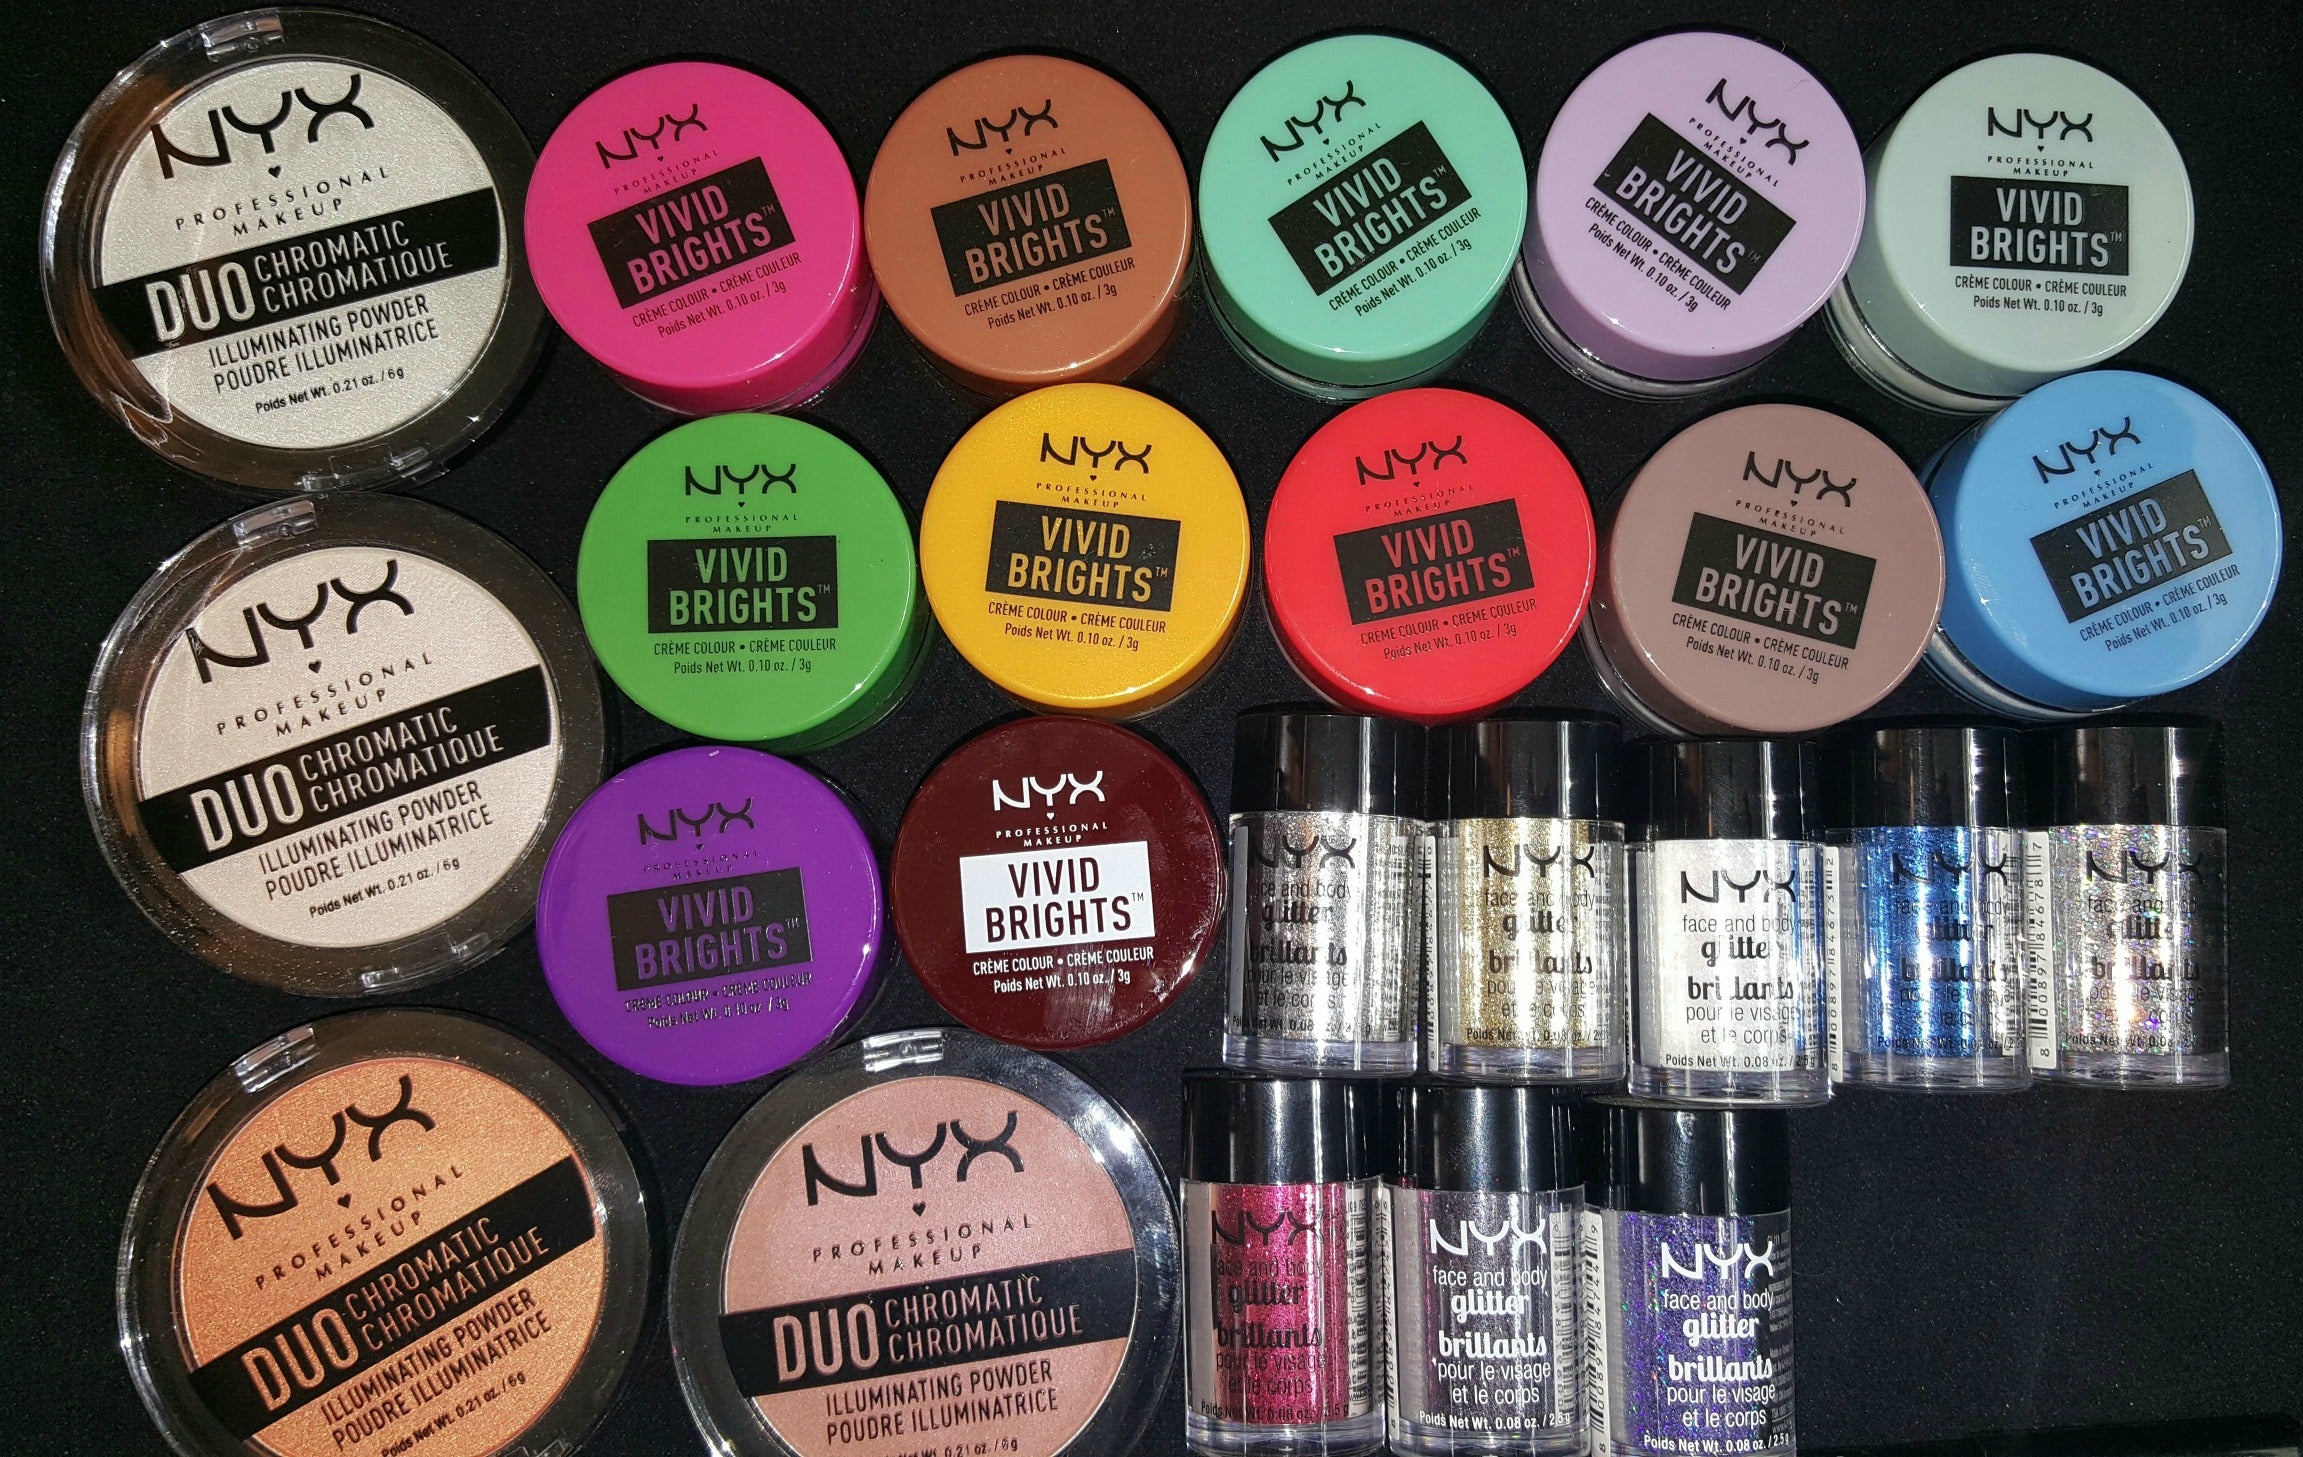 Review, Photos, Swatches, Makeup Trend 2017, 2018: NYX Duo Chromatic Illuminating Powders, Face and Body Glitter, Vivid Brights Crème Colours, Inner Eye Brighteners